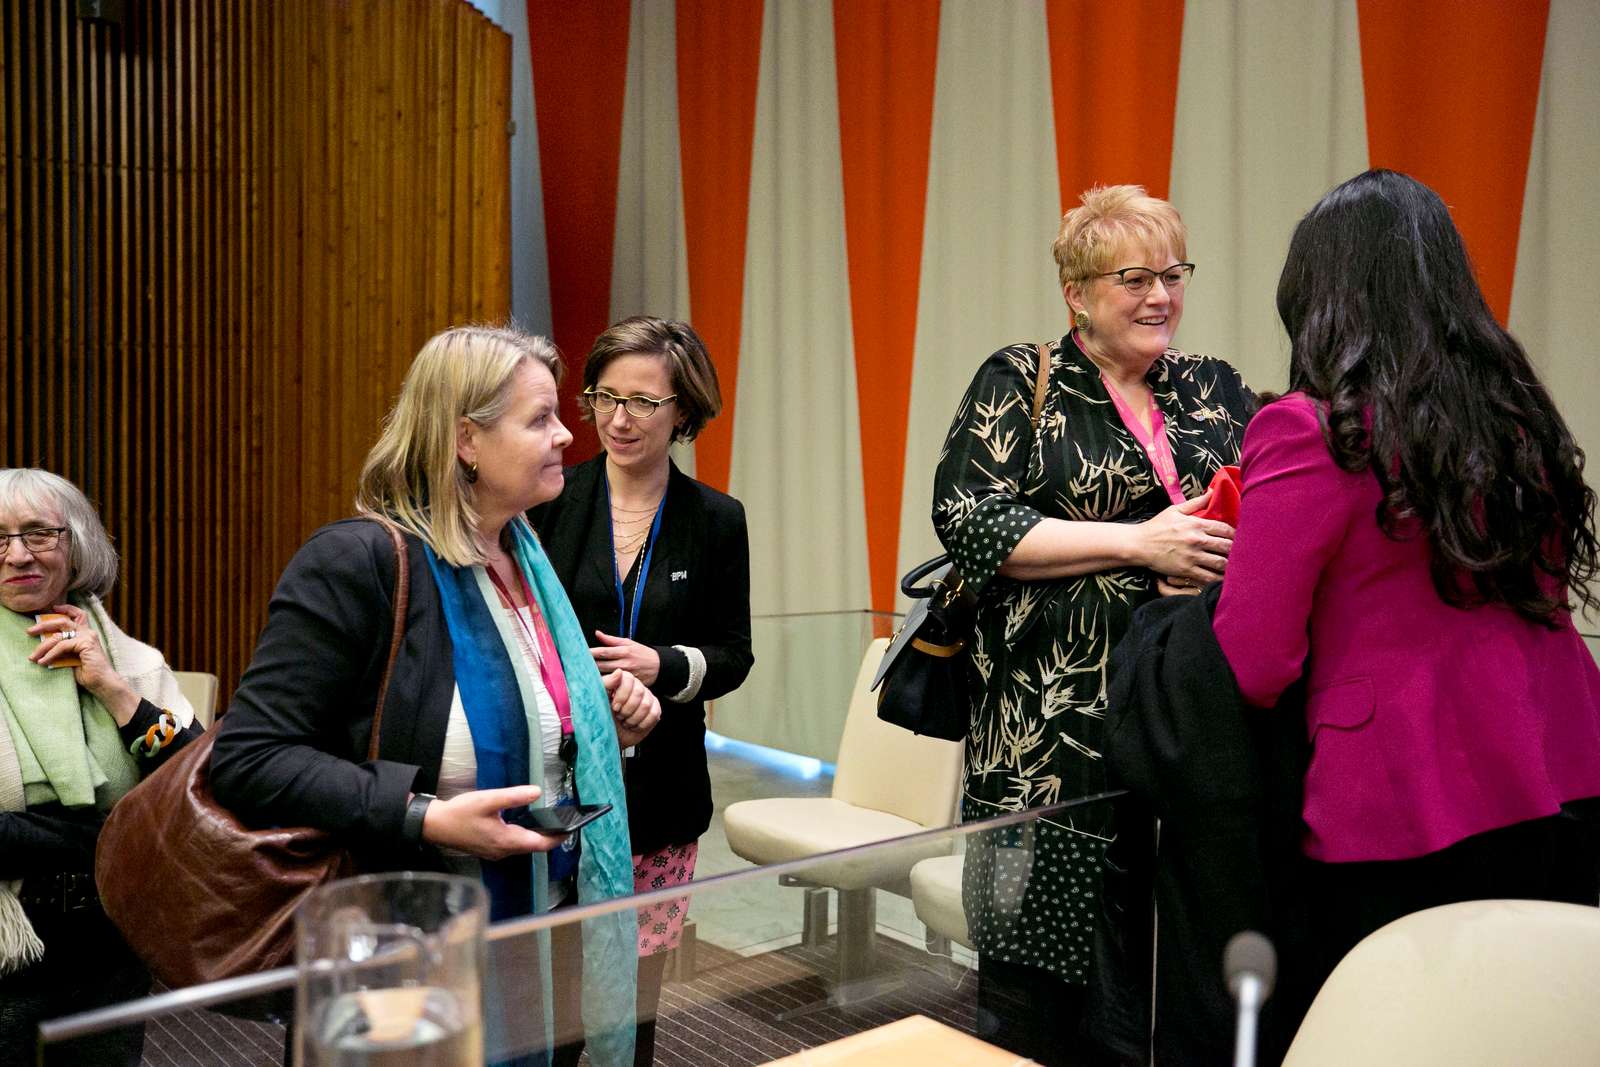 Ms Trine Skei Grande, Minister of Culture and Equality, Norway (right)